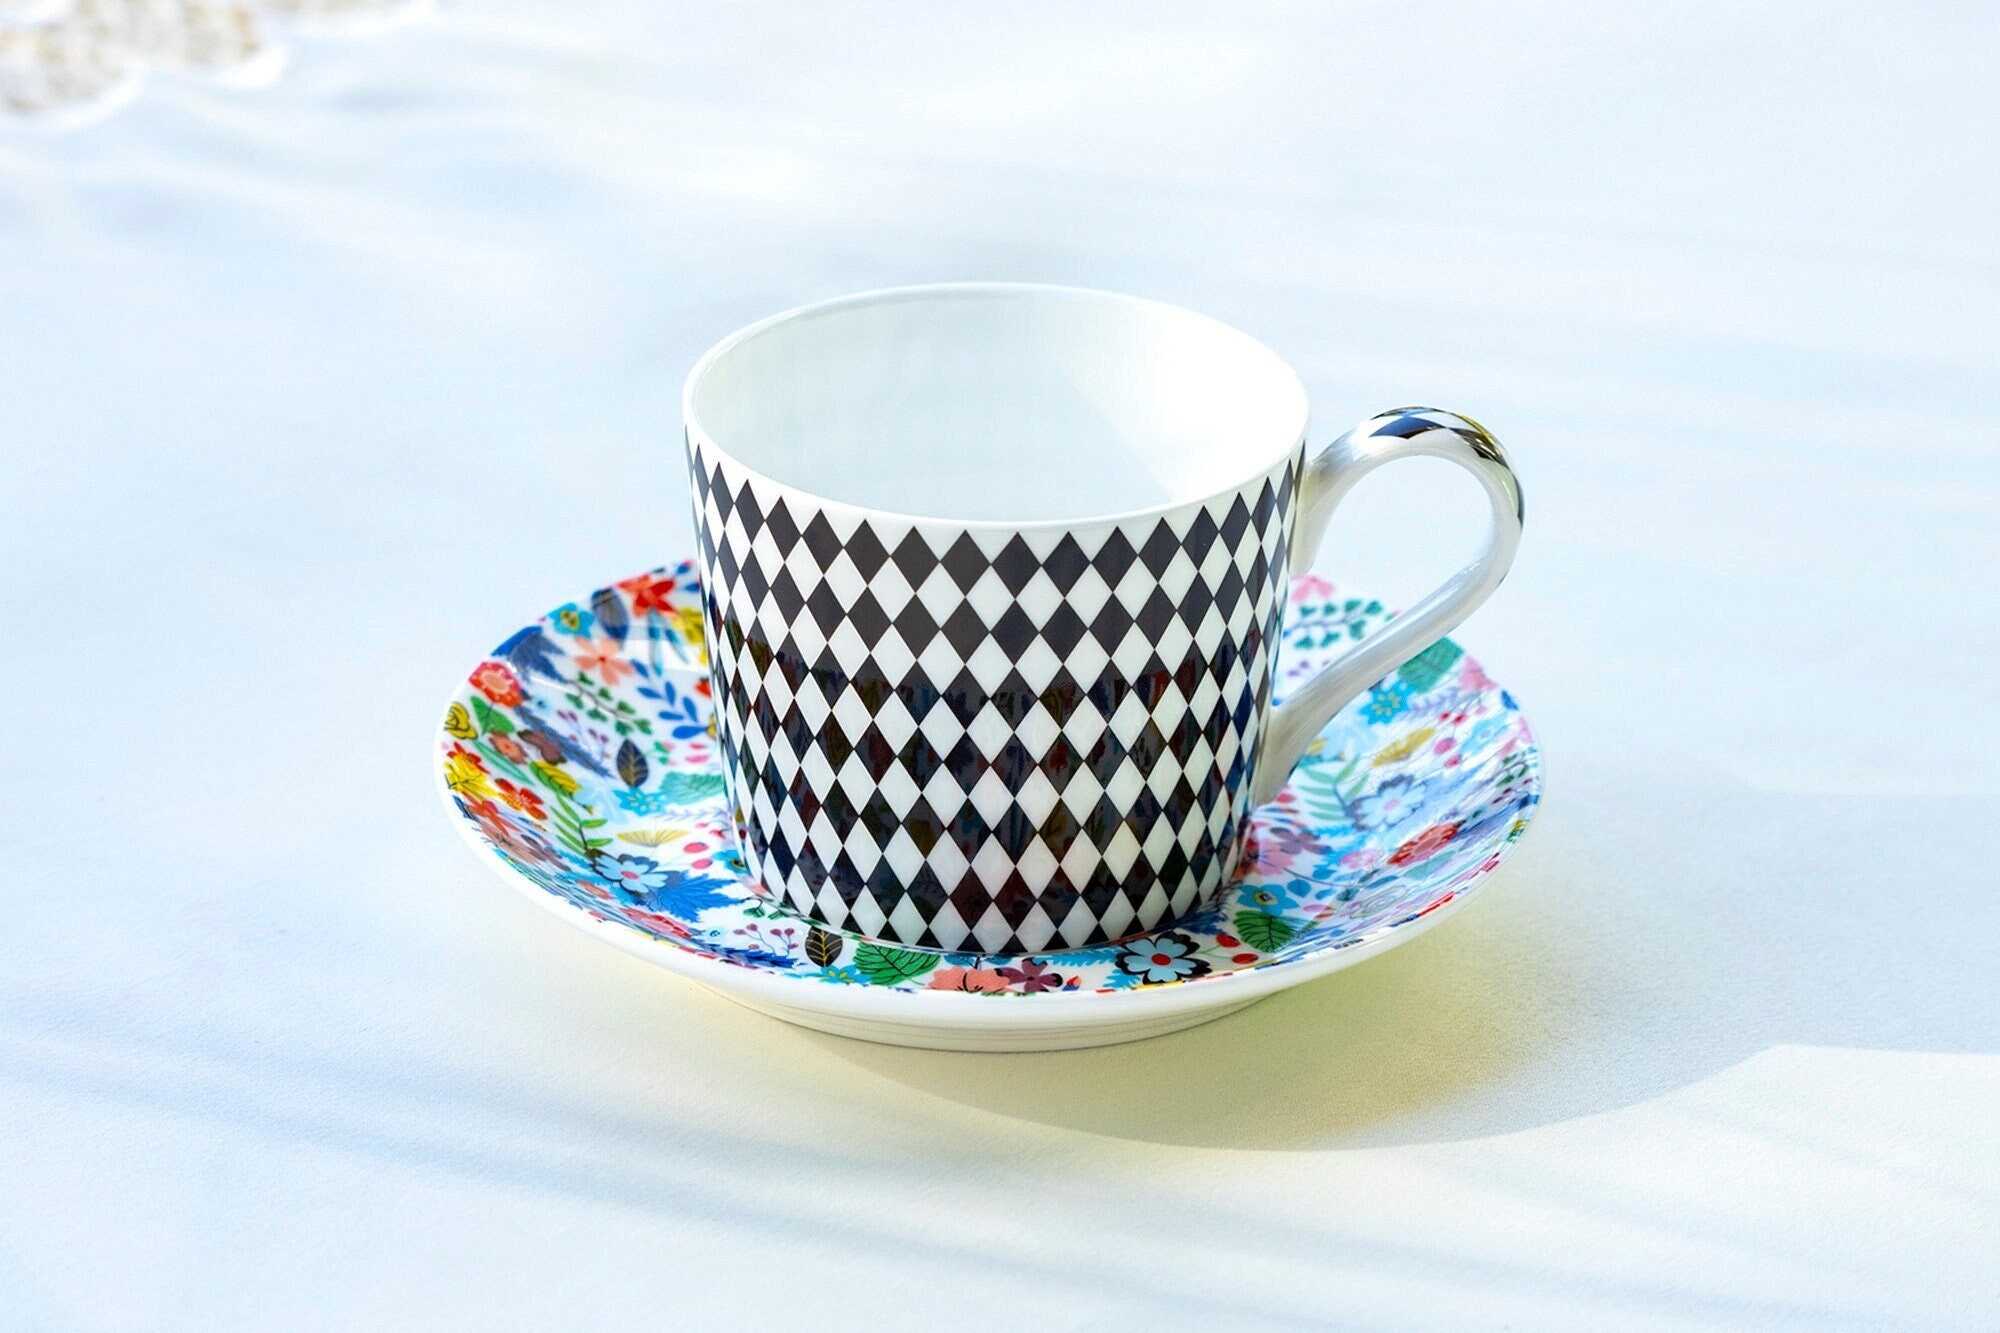 Alice in Wonderland Teacup and Saucer Set, 8 Ounces. Green, Blue or Pink  for Your Mad Hatter Tea Party 